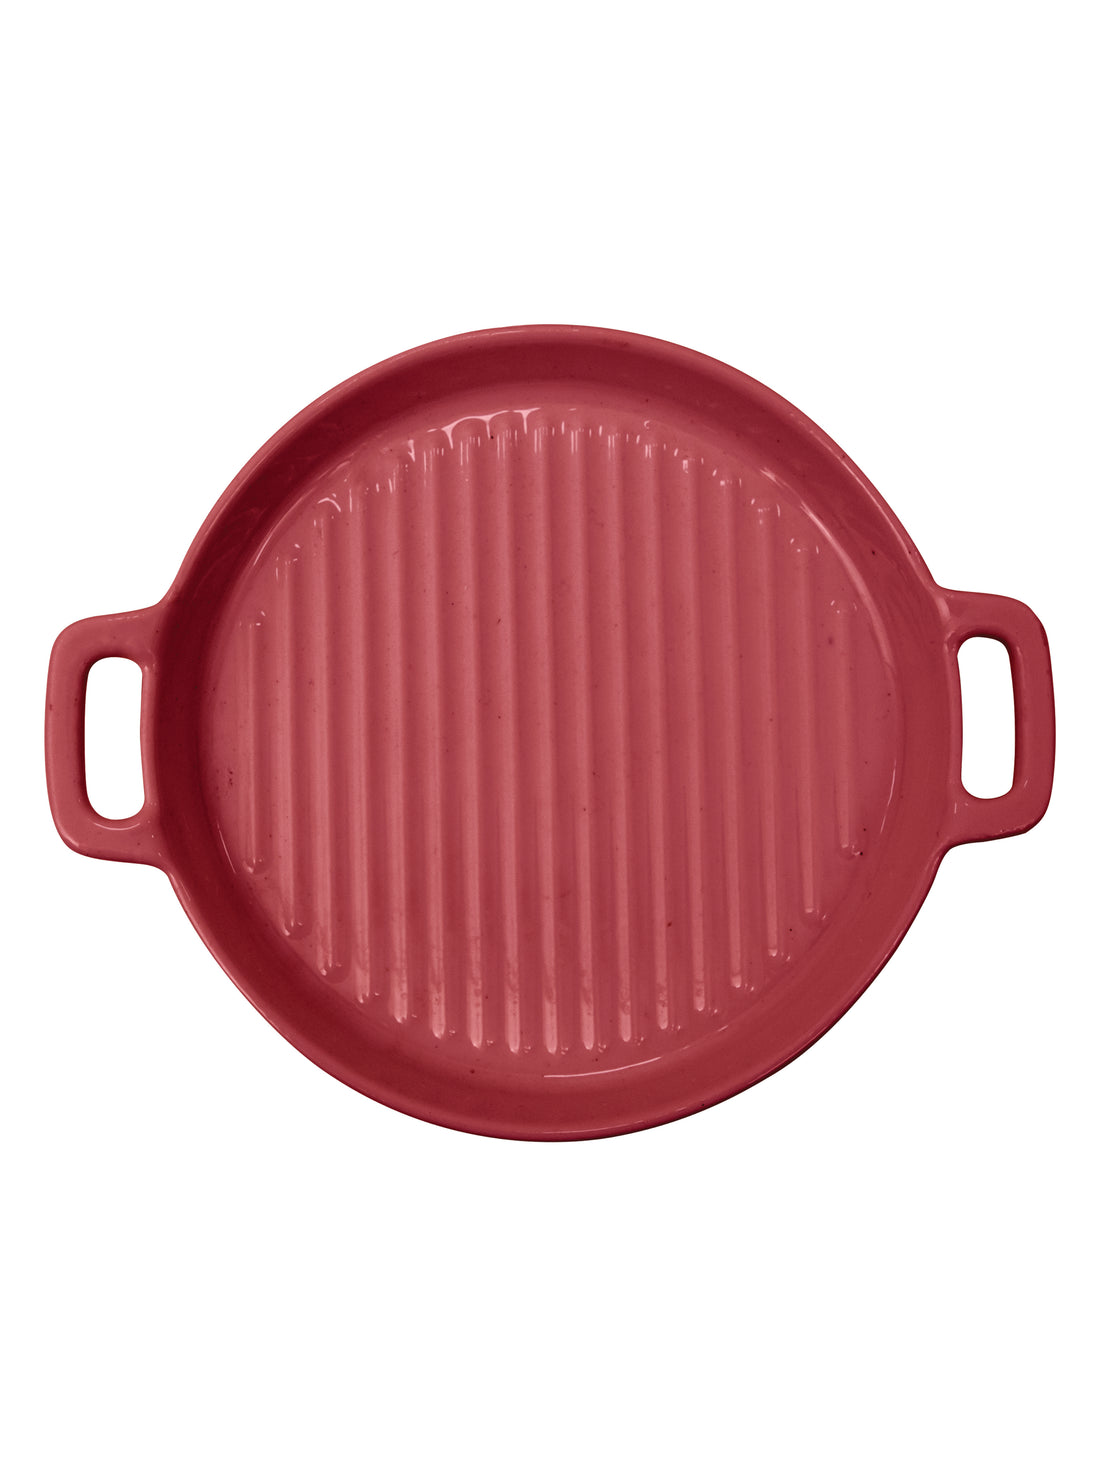 Ceramic Round with Handle Grill Plates for Serving, Red Color